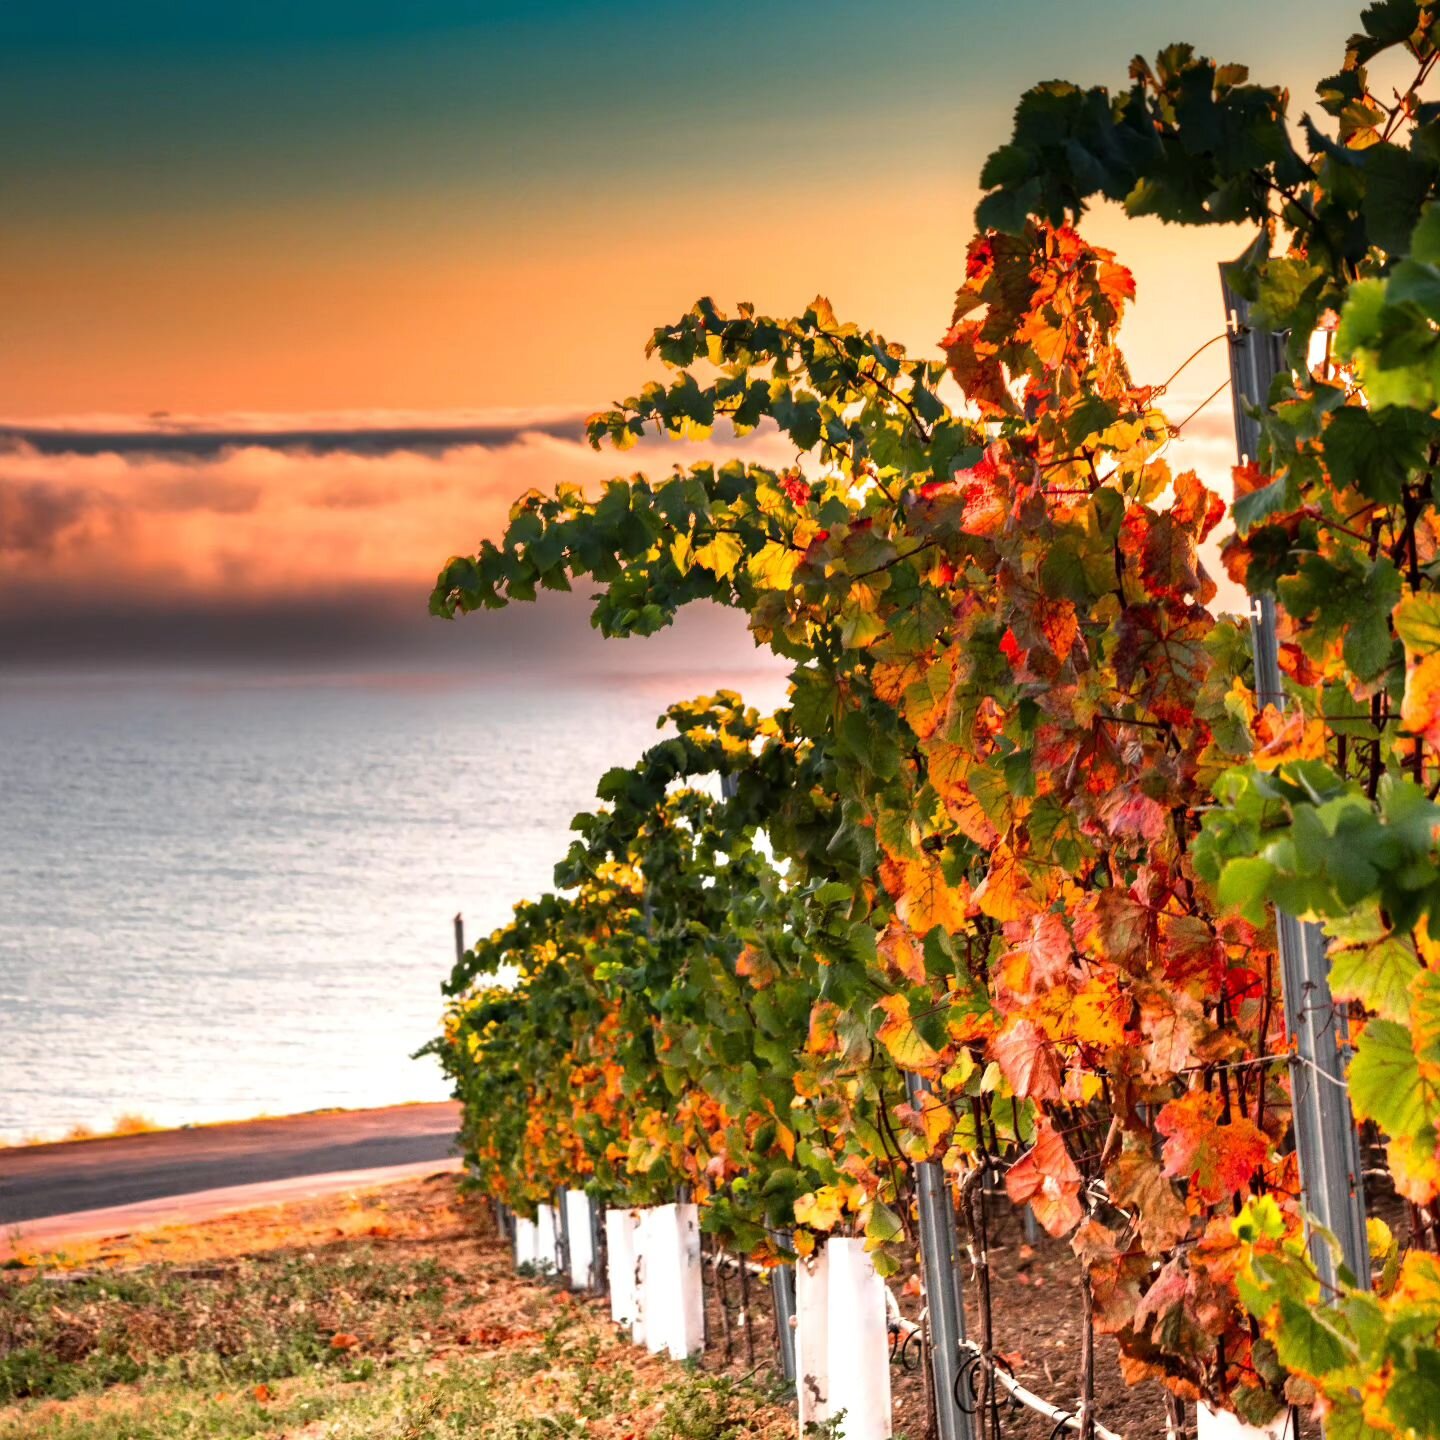 Fall in the vineyard!🍂🍁🍇
Our thriving south-facing hillside vineyards, overlook the Pacific Ocean and Catalina Island 🍷🍇
📸: @erikjayphotographer

#catalinaisland #pacificocean #vineyards #palosverdes #catalinaviewwine #palosverdespeninsulawine 